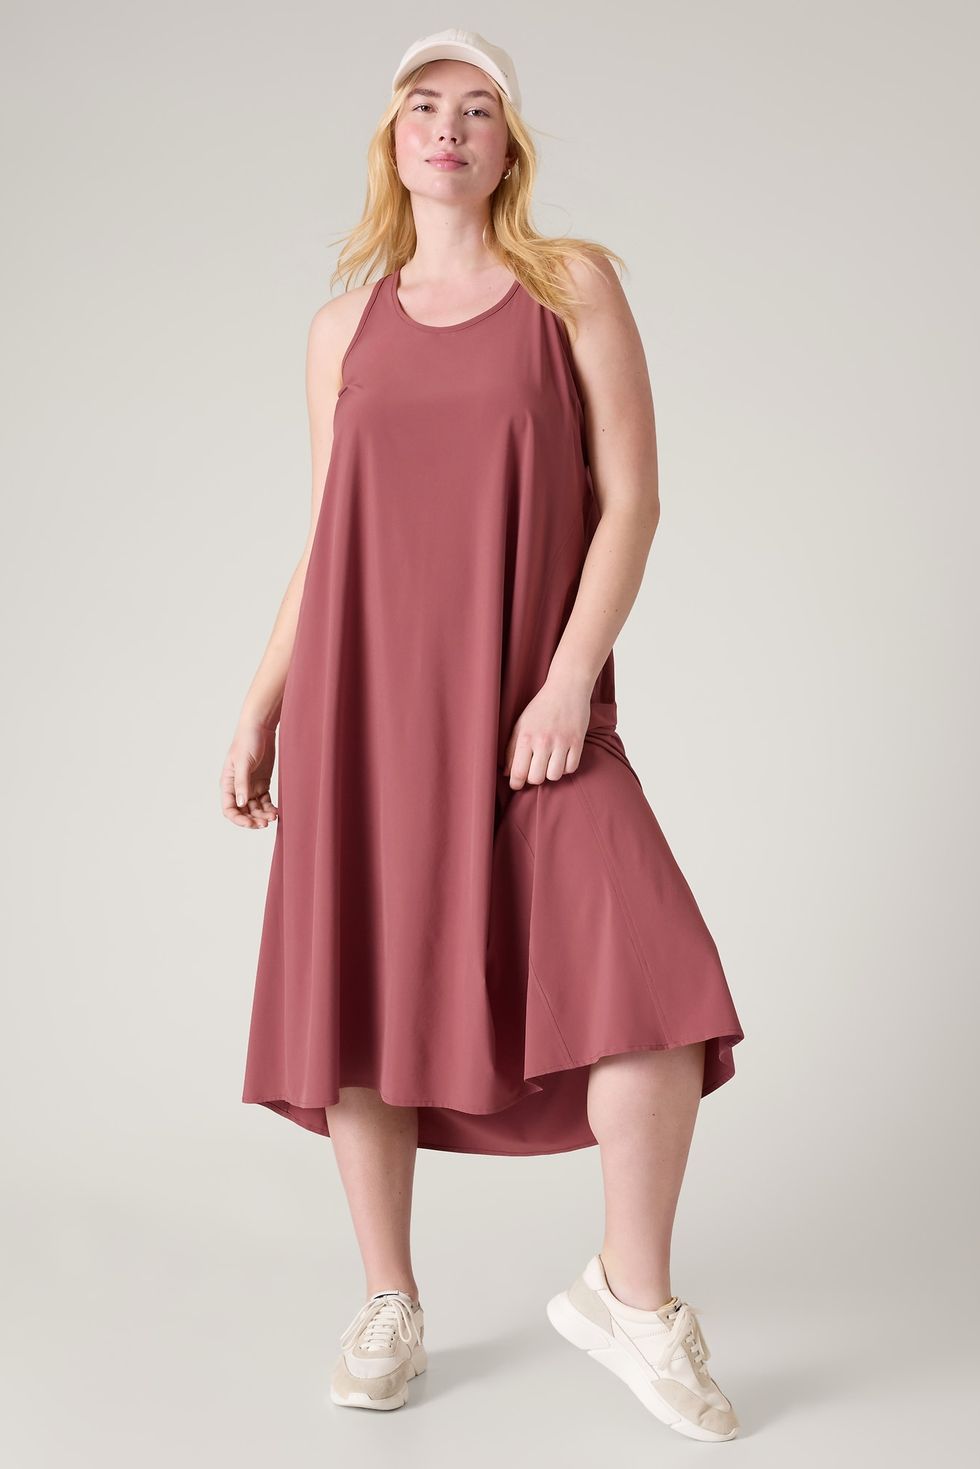 Wrinkle-Free Vacation & Travel Dresses: Chic Styles with Pockets – karina  dresses